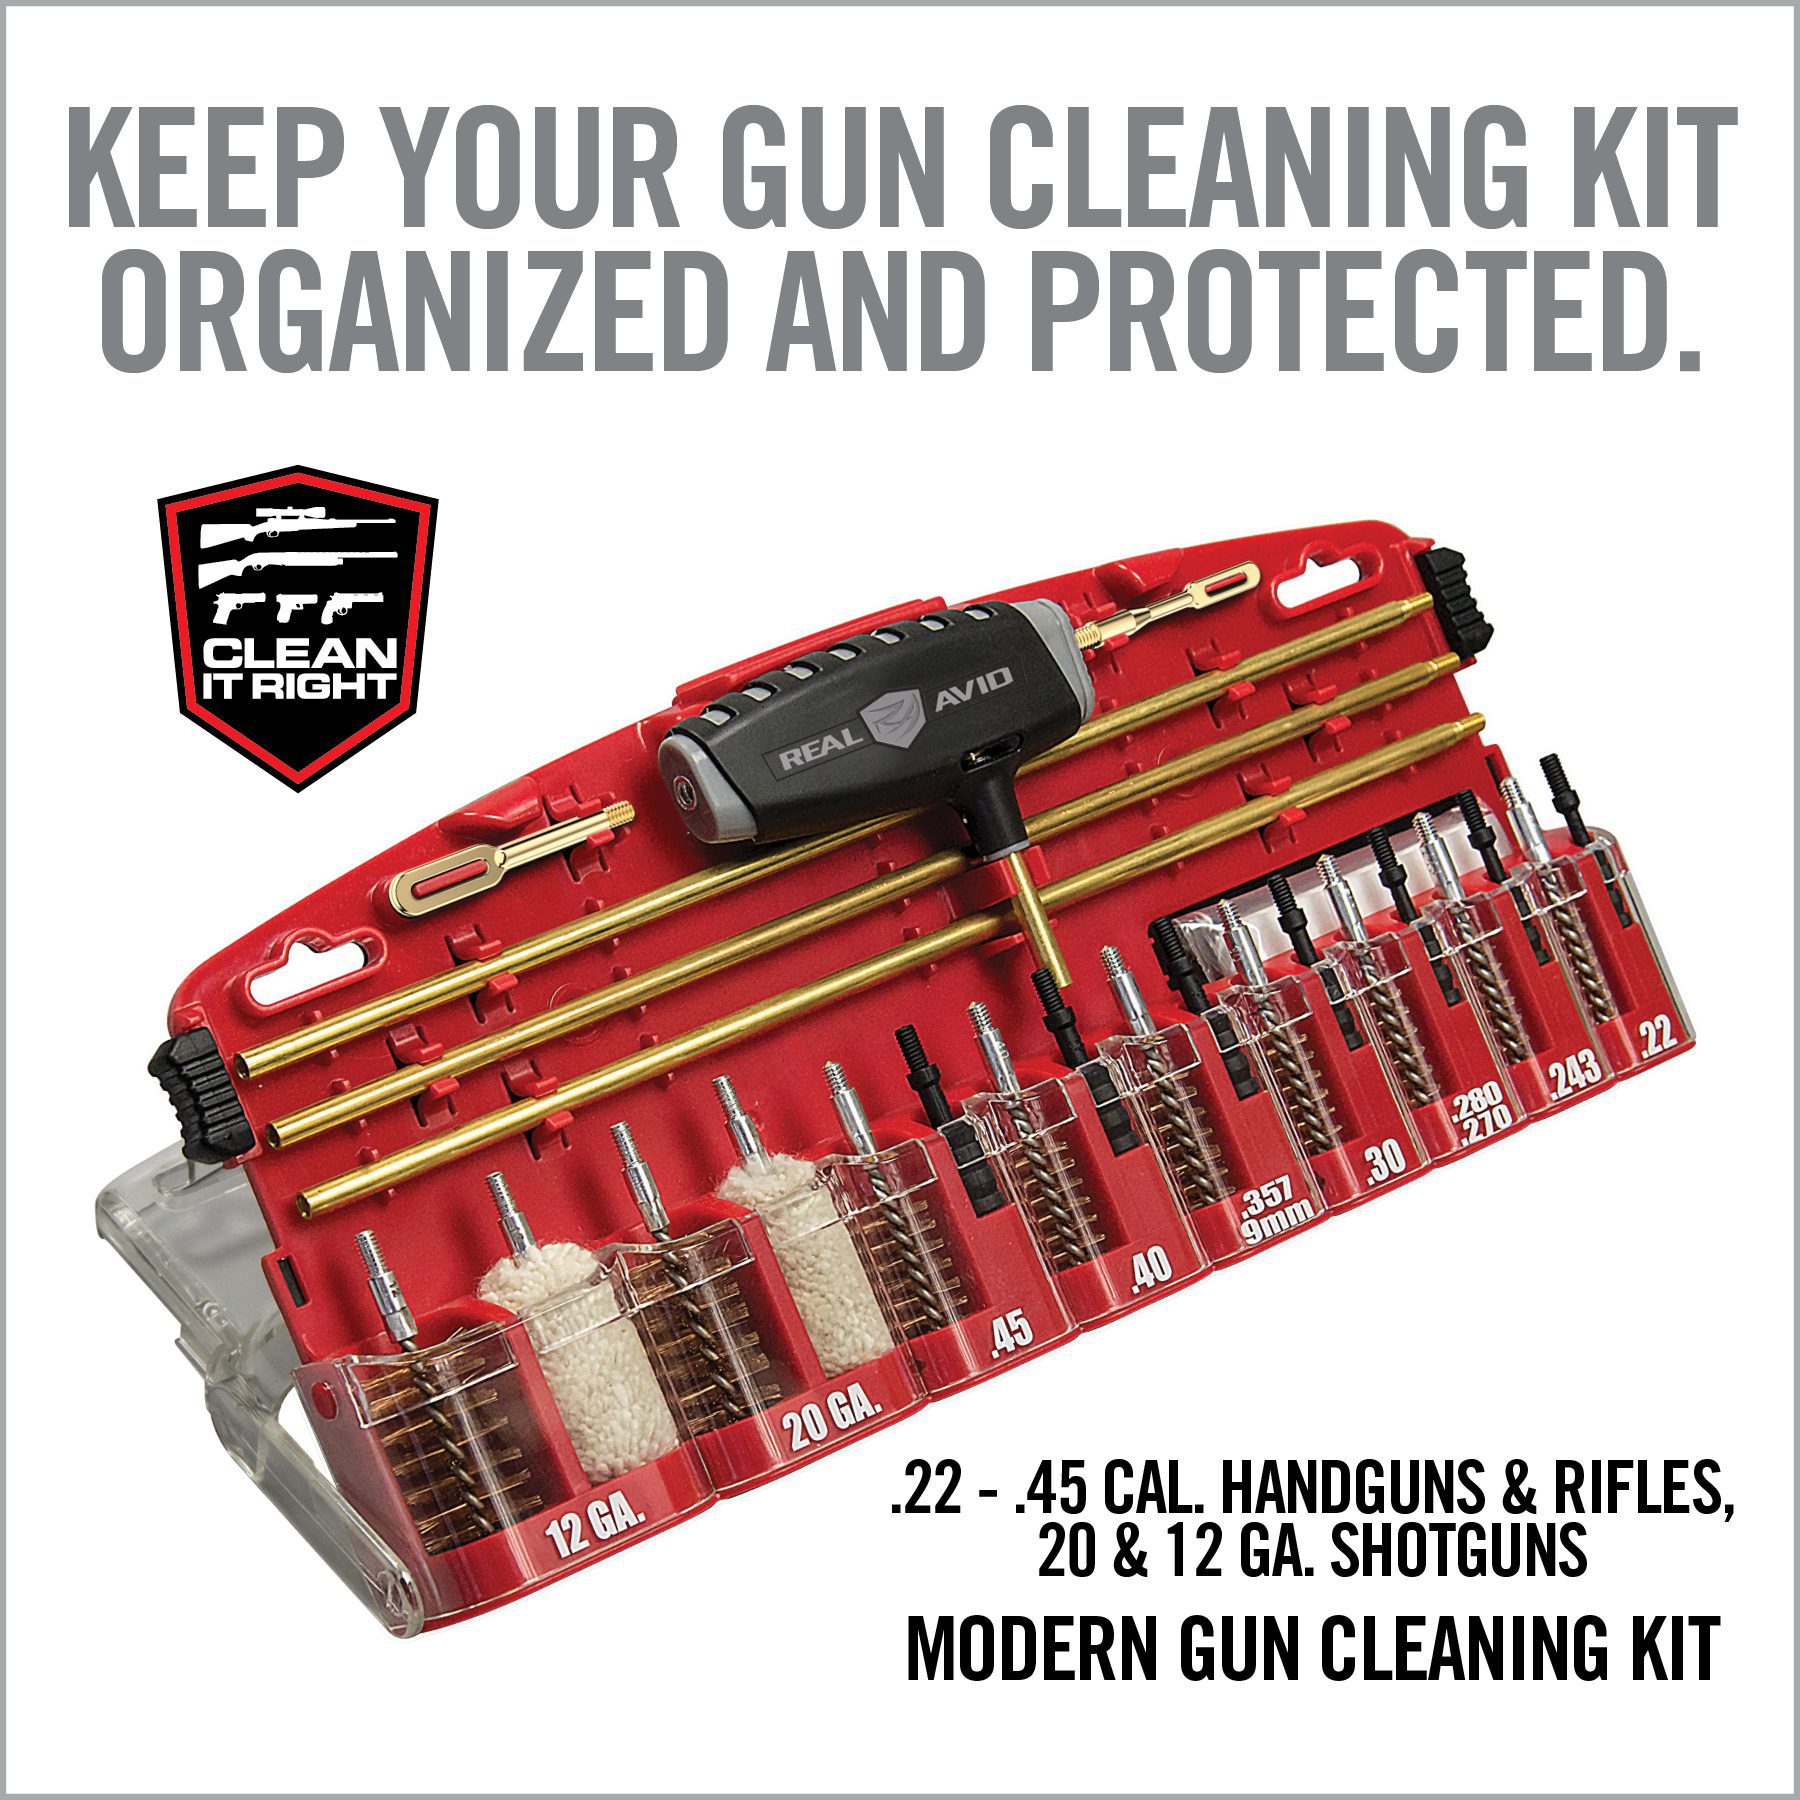 the gun cleaning kit is organized and protected